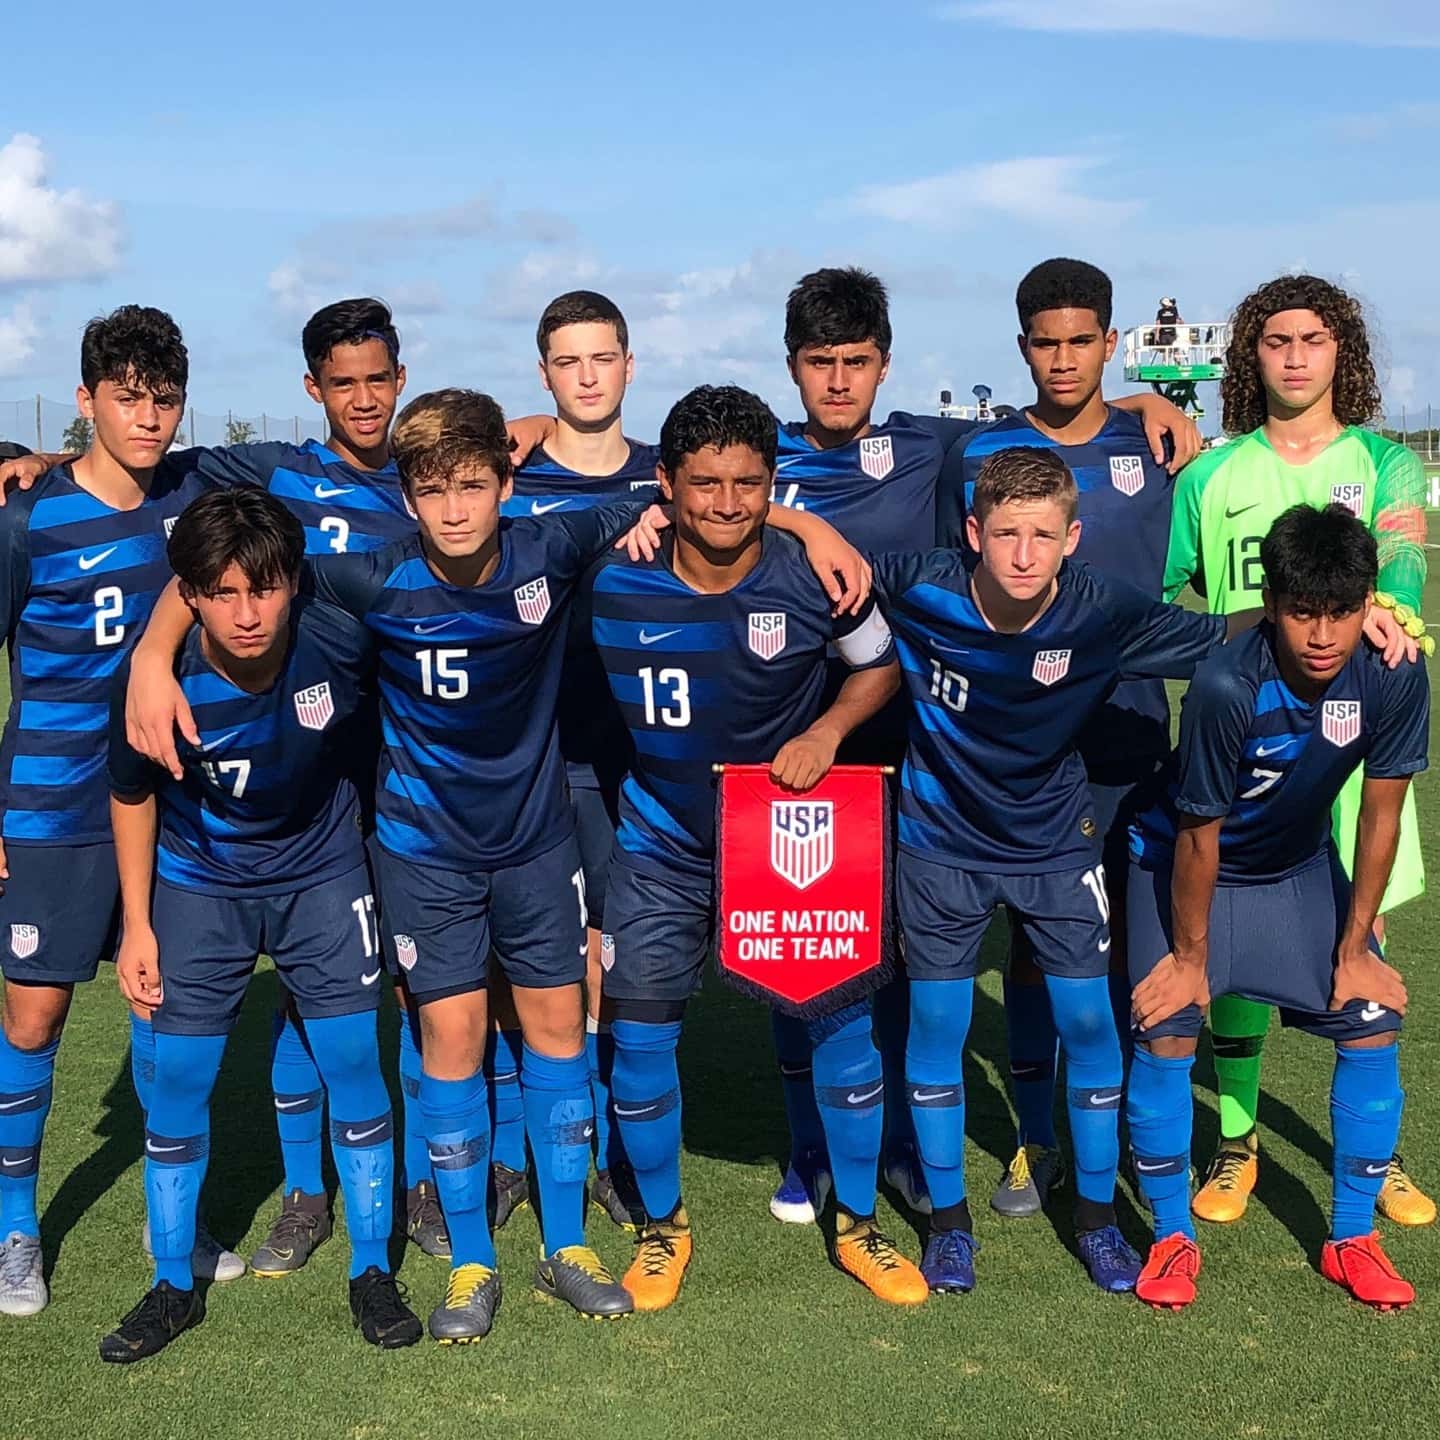 USA Advances To 2019 Concacaf U15 Boy’s Championship Semifinals With 2